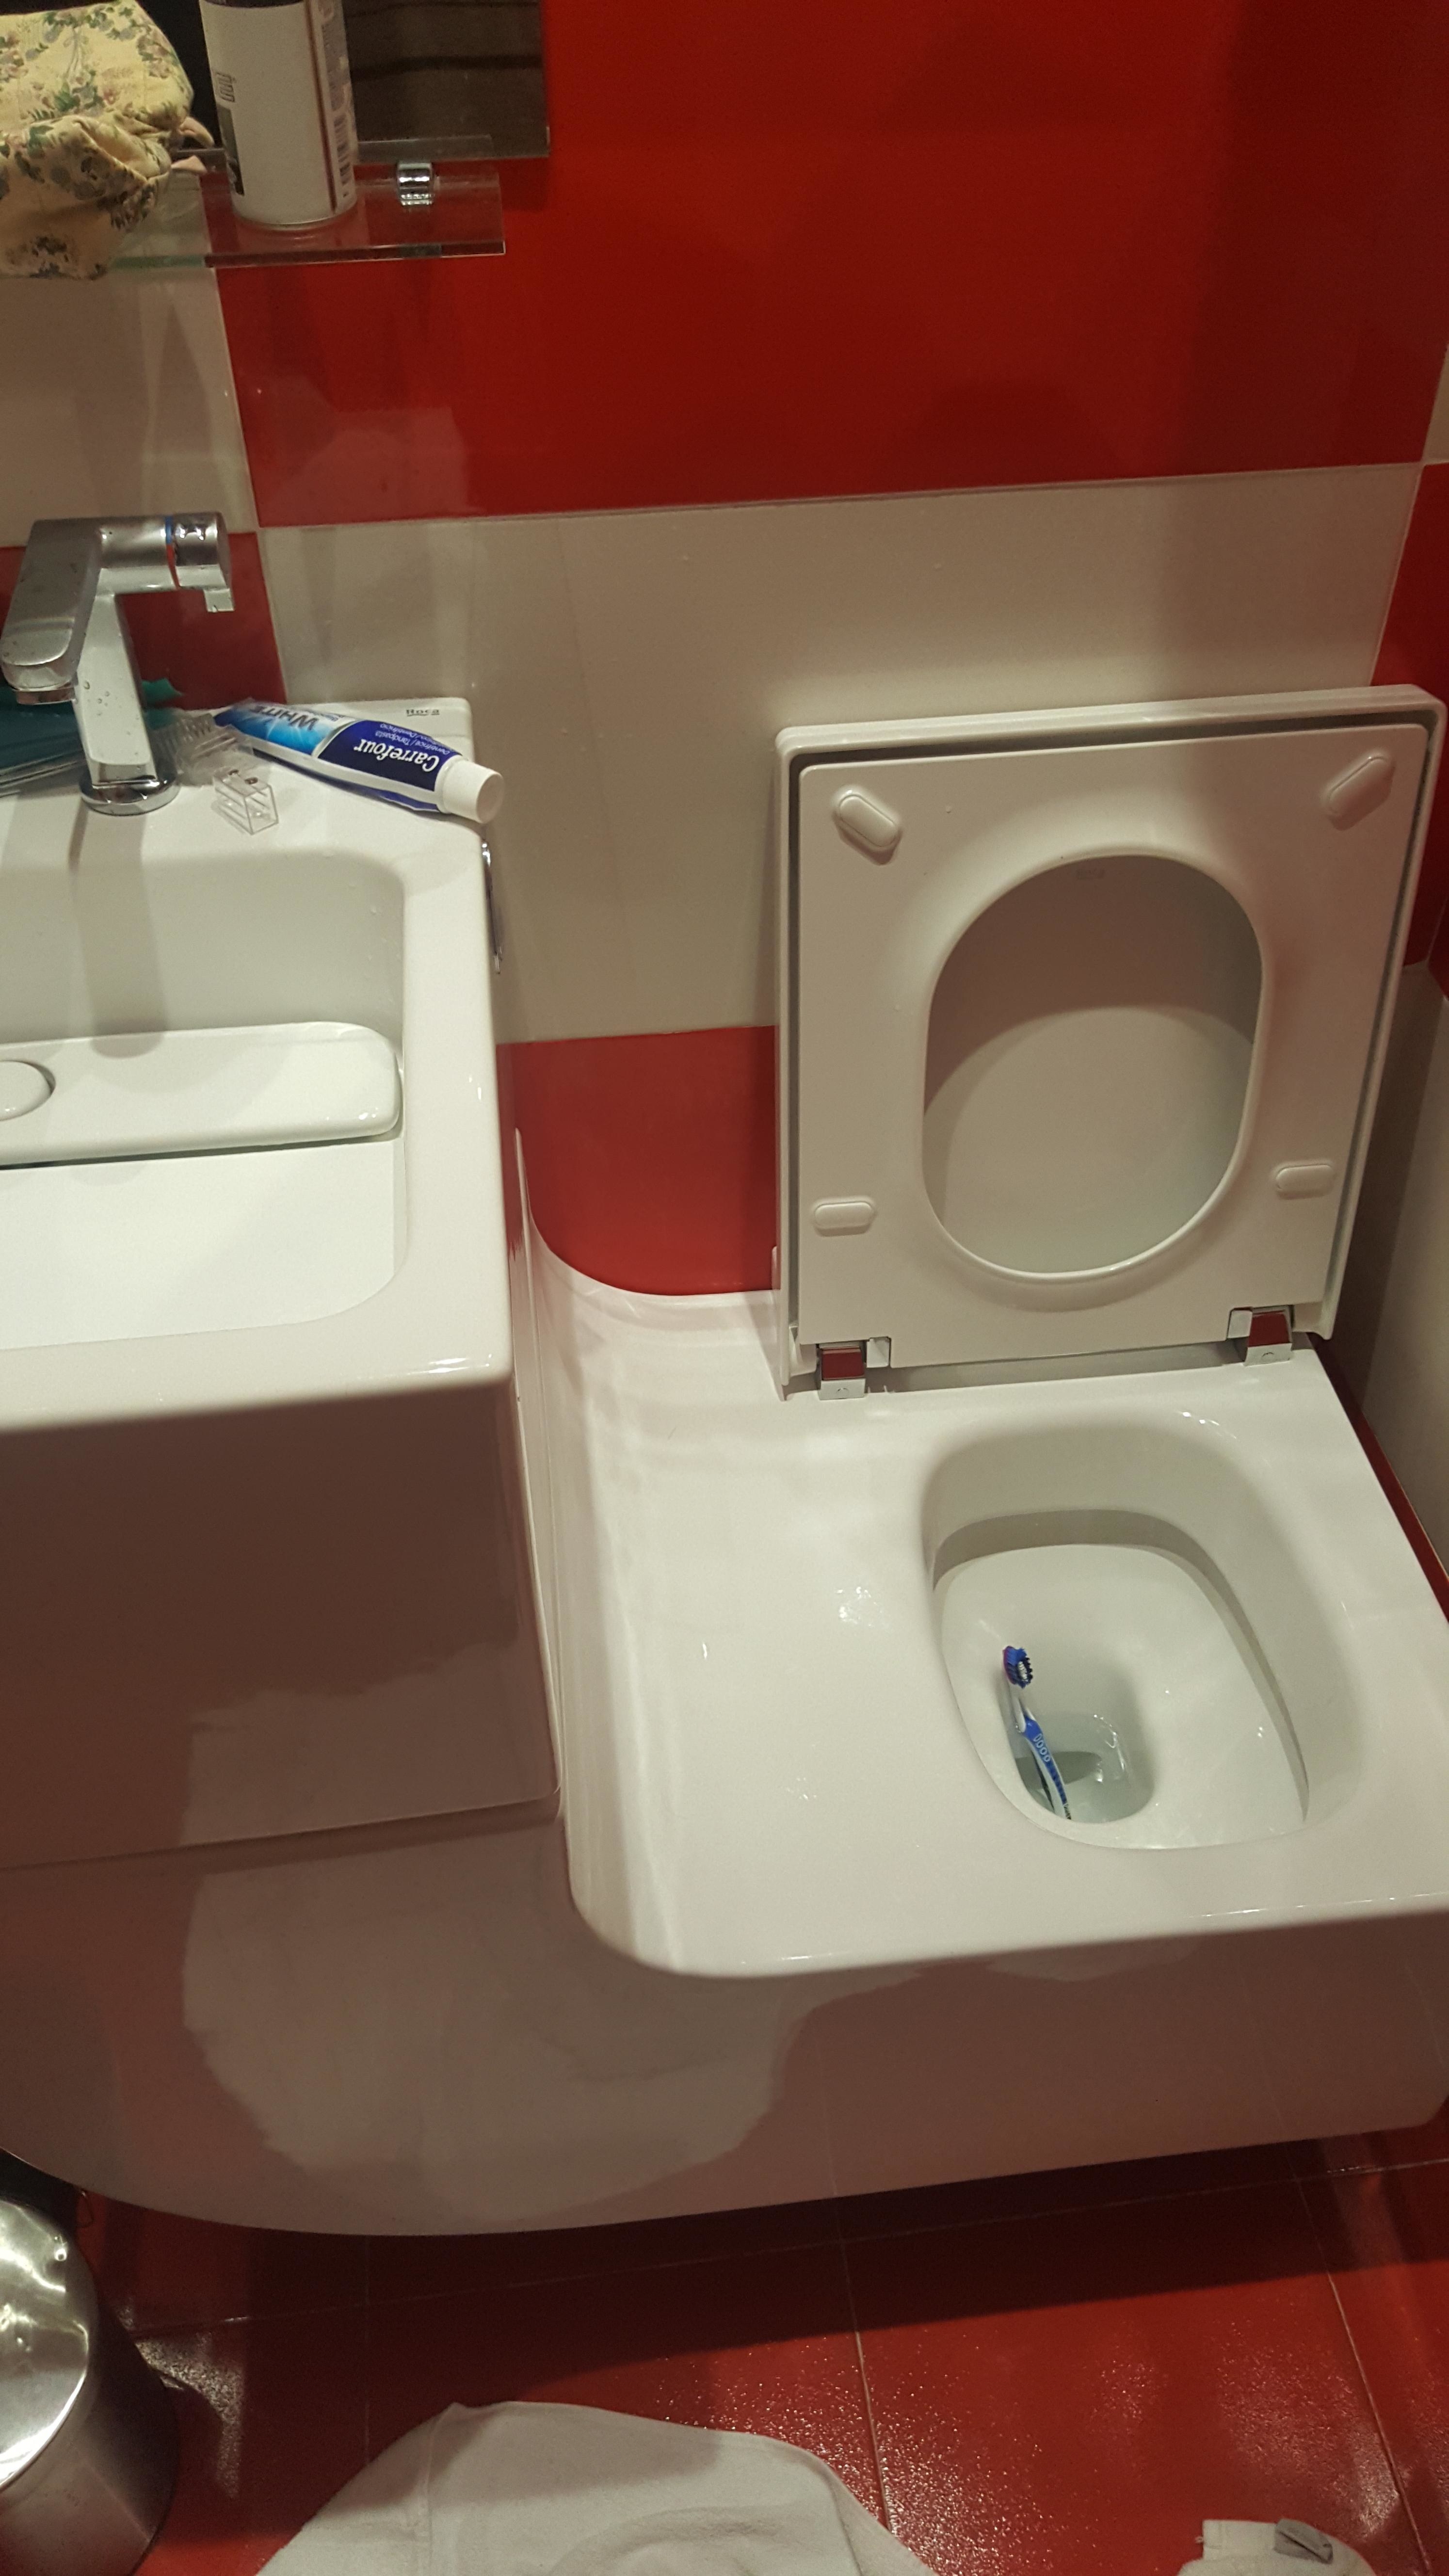 A toilet (with a toothbrush in it) with a sloping side that starts at the end of a sink